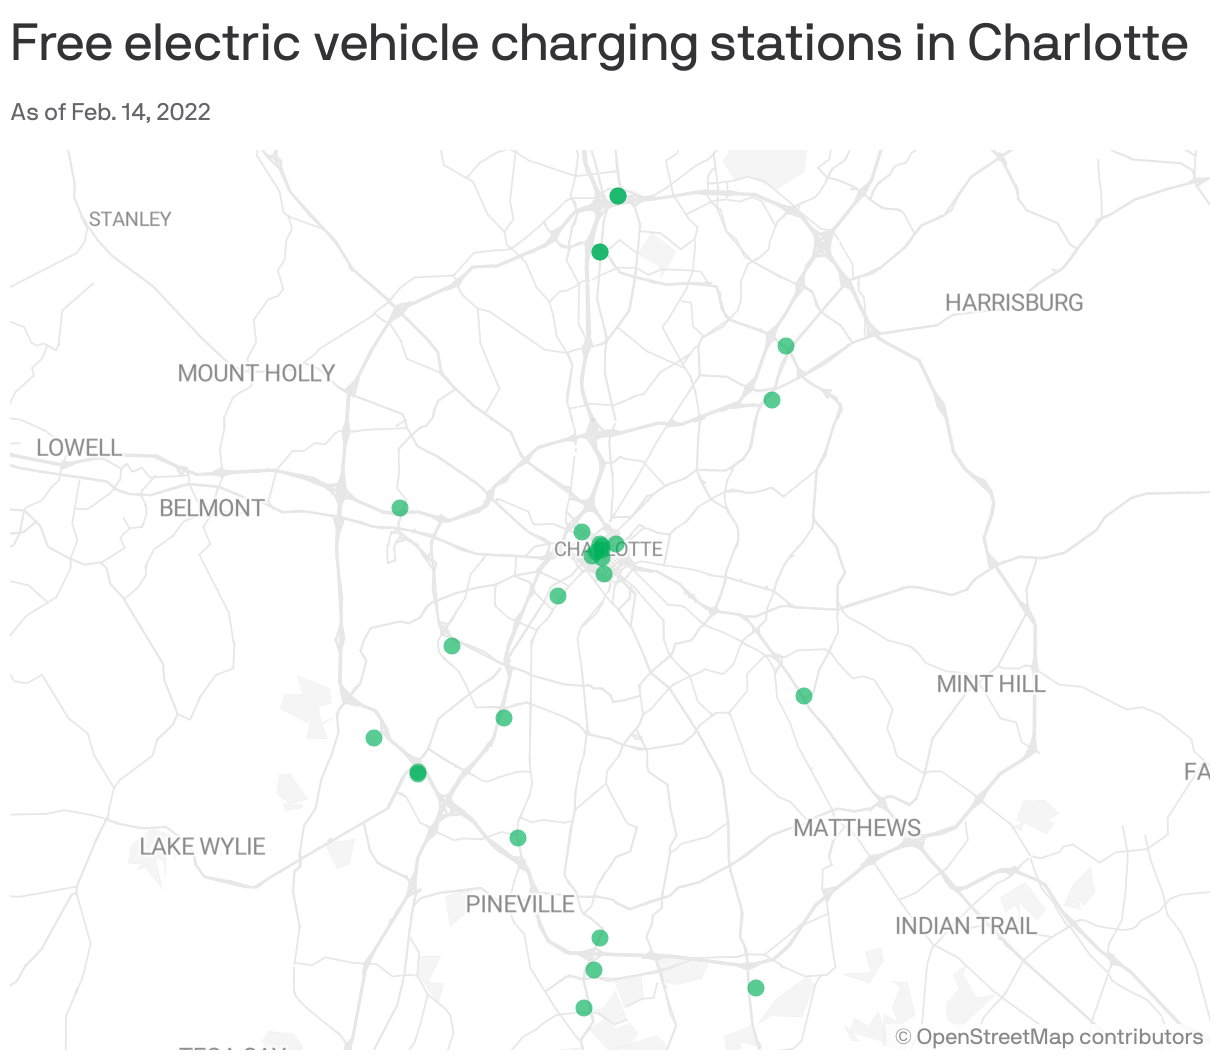 Free electric vehicle charging stations in Charlotte